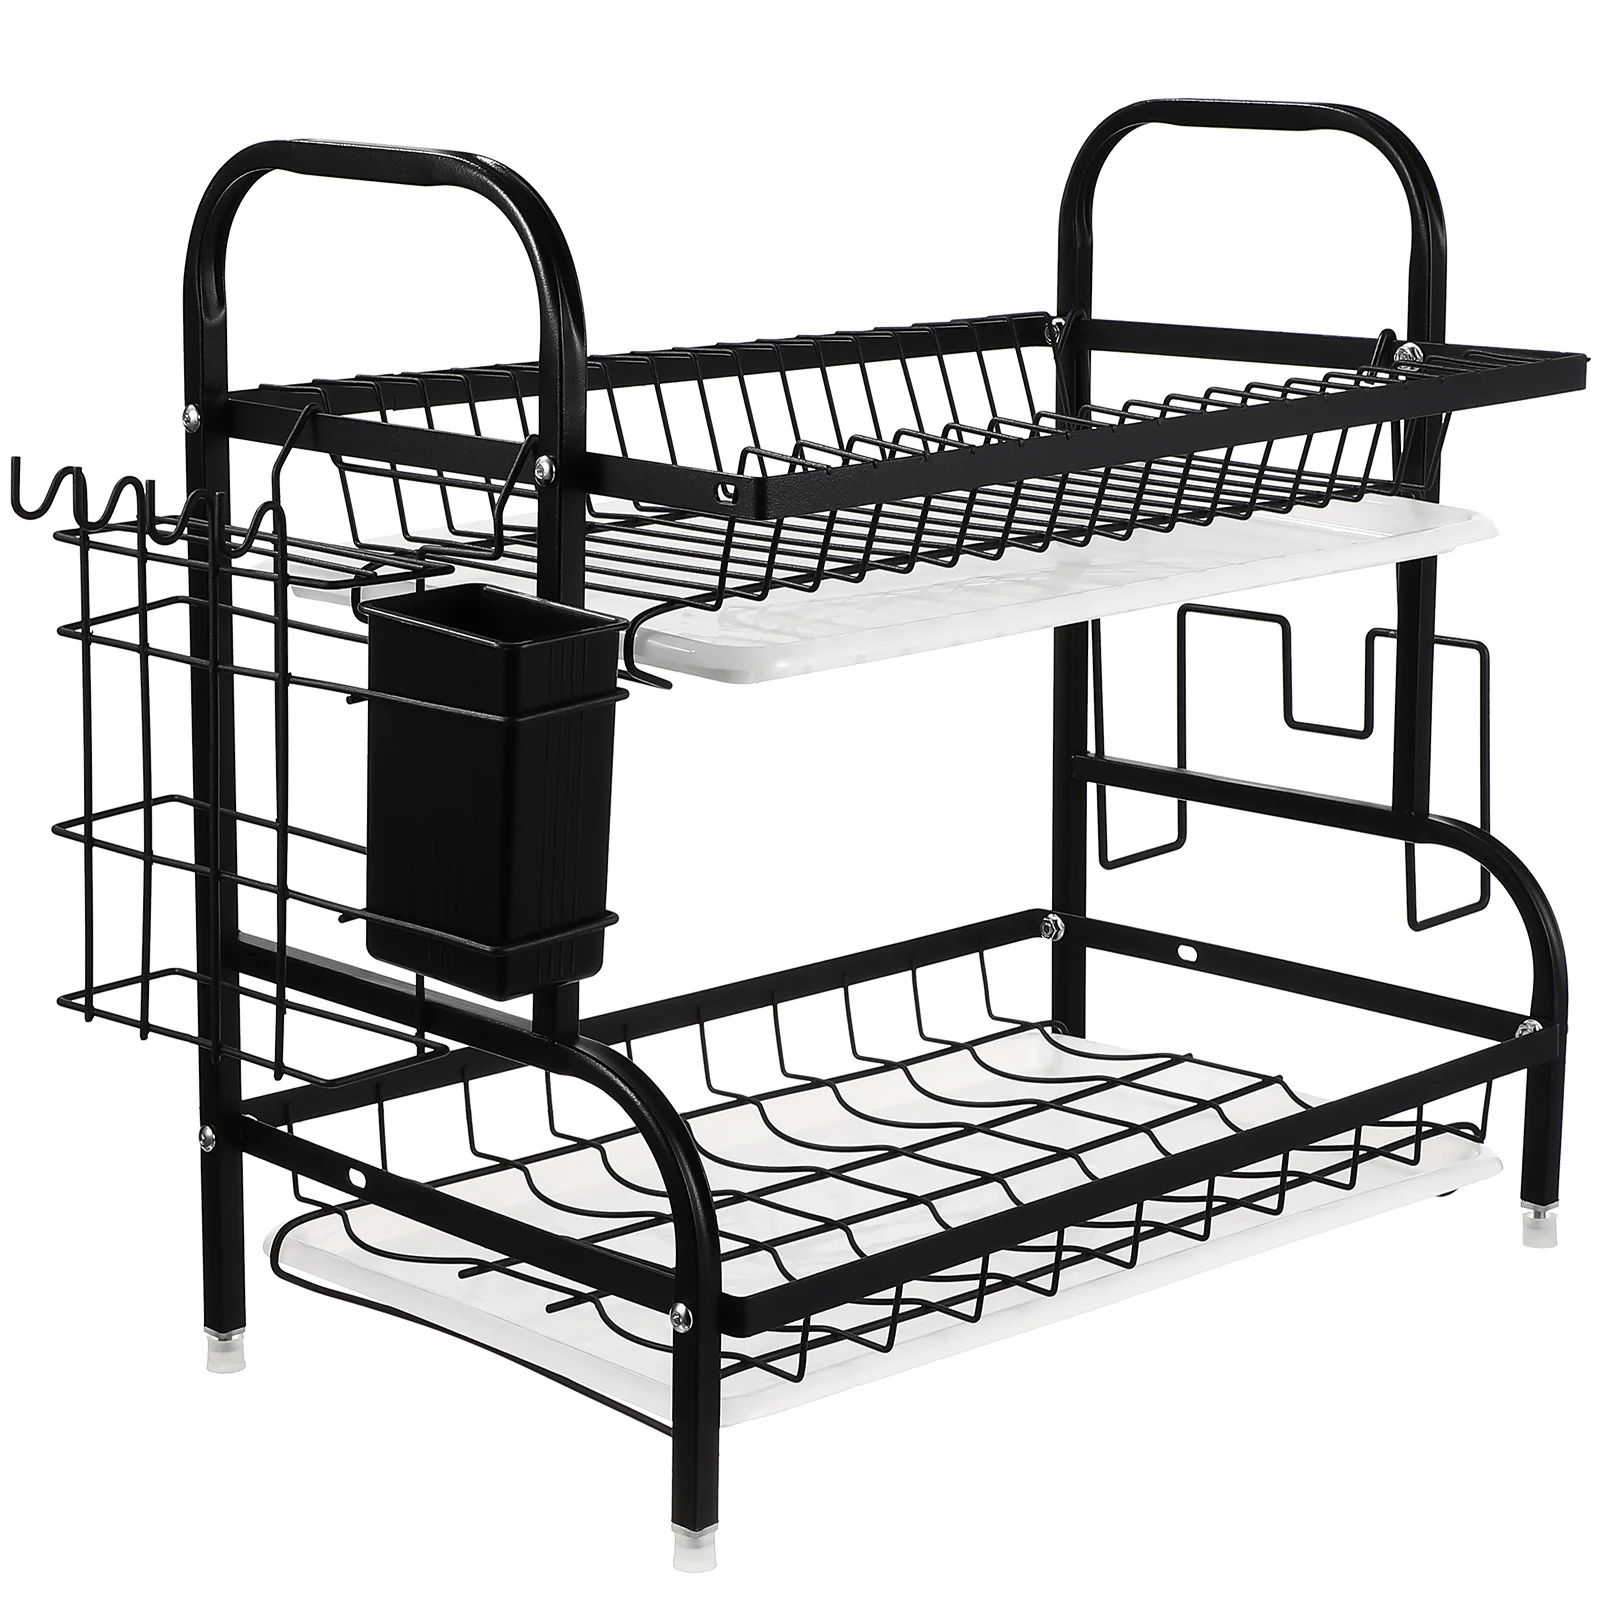 

Drainer Rack Bowl Multi-layer Kitchen Plate Holders Simple Draining Racks Basket Counter Stand Dish Storage Sink